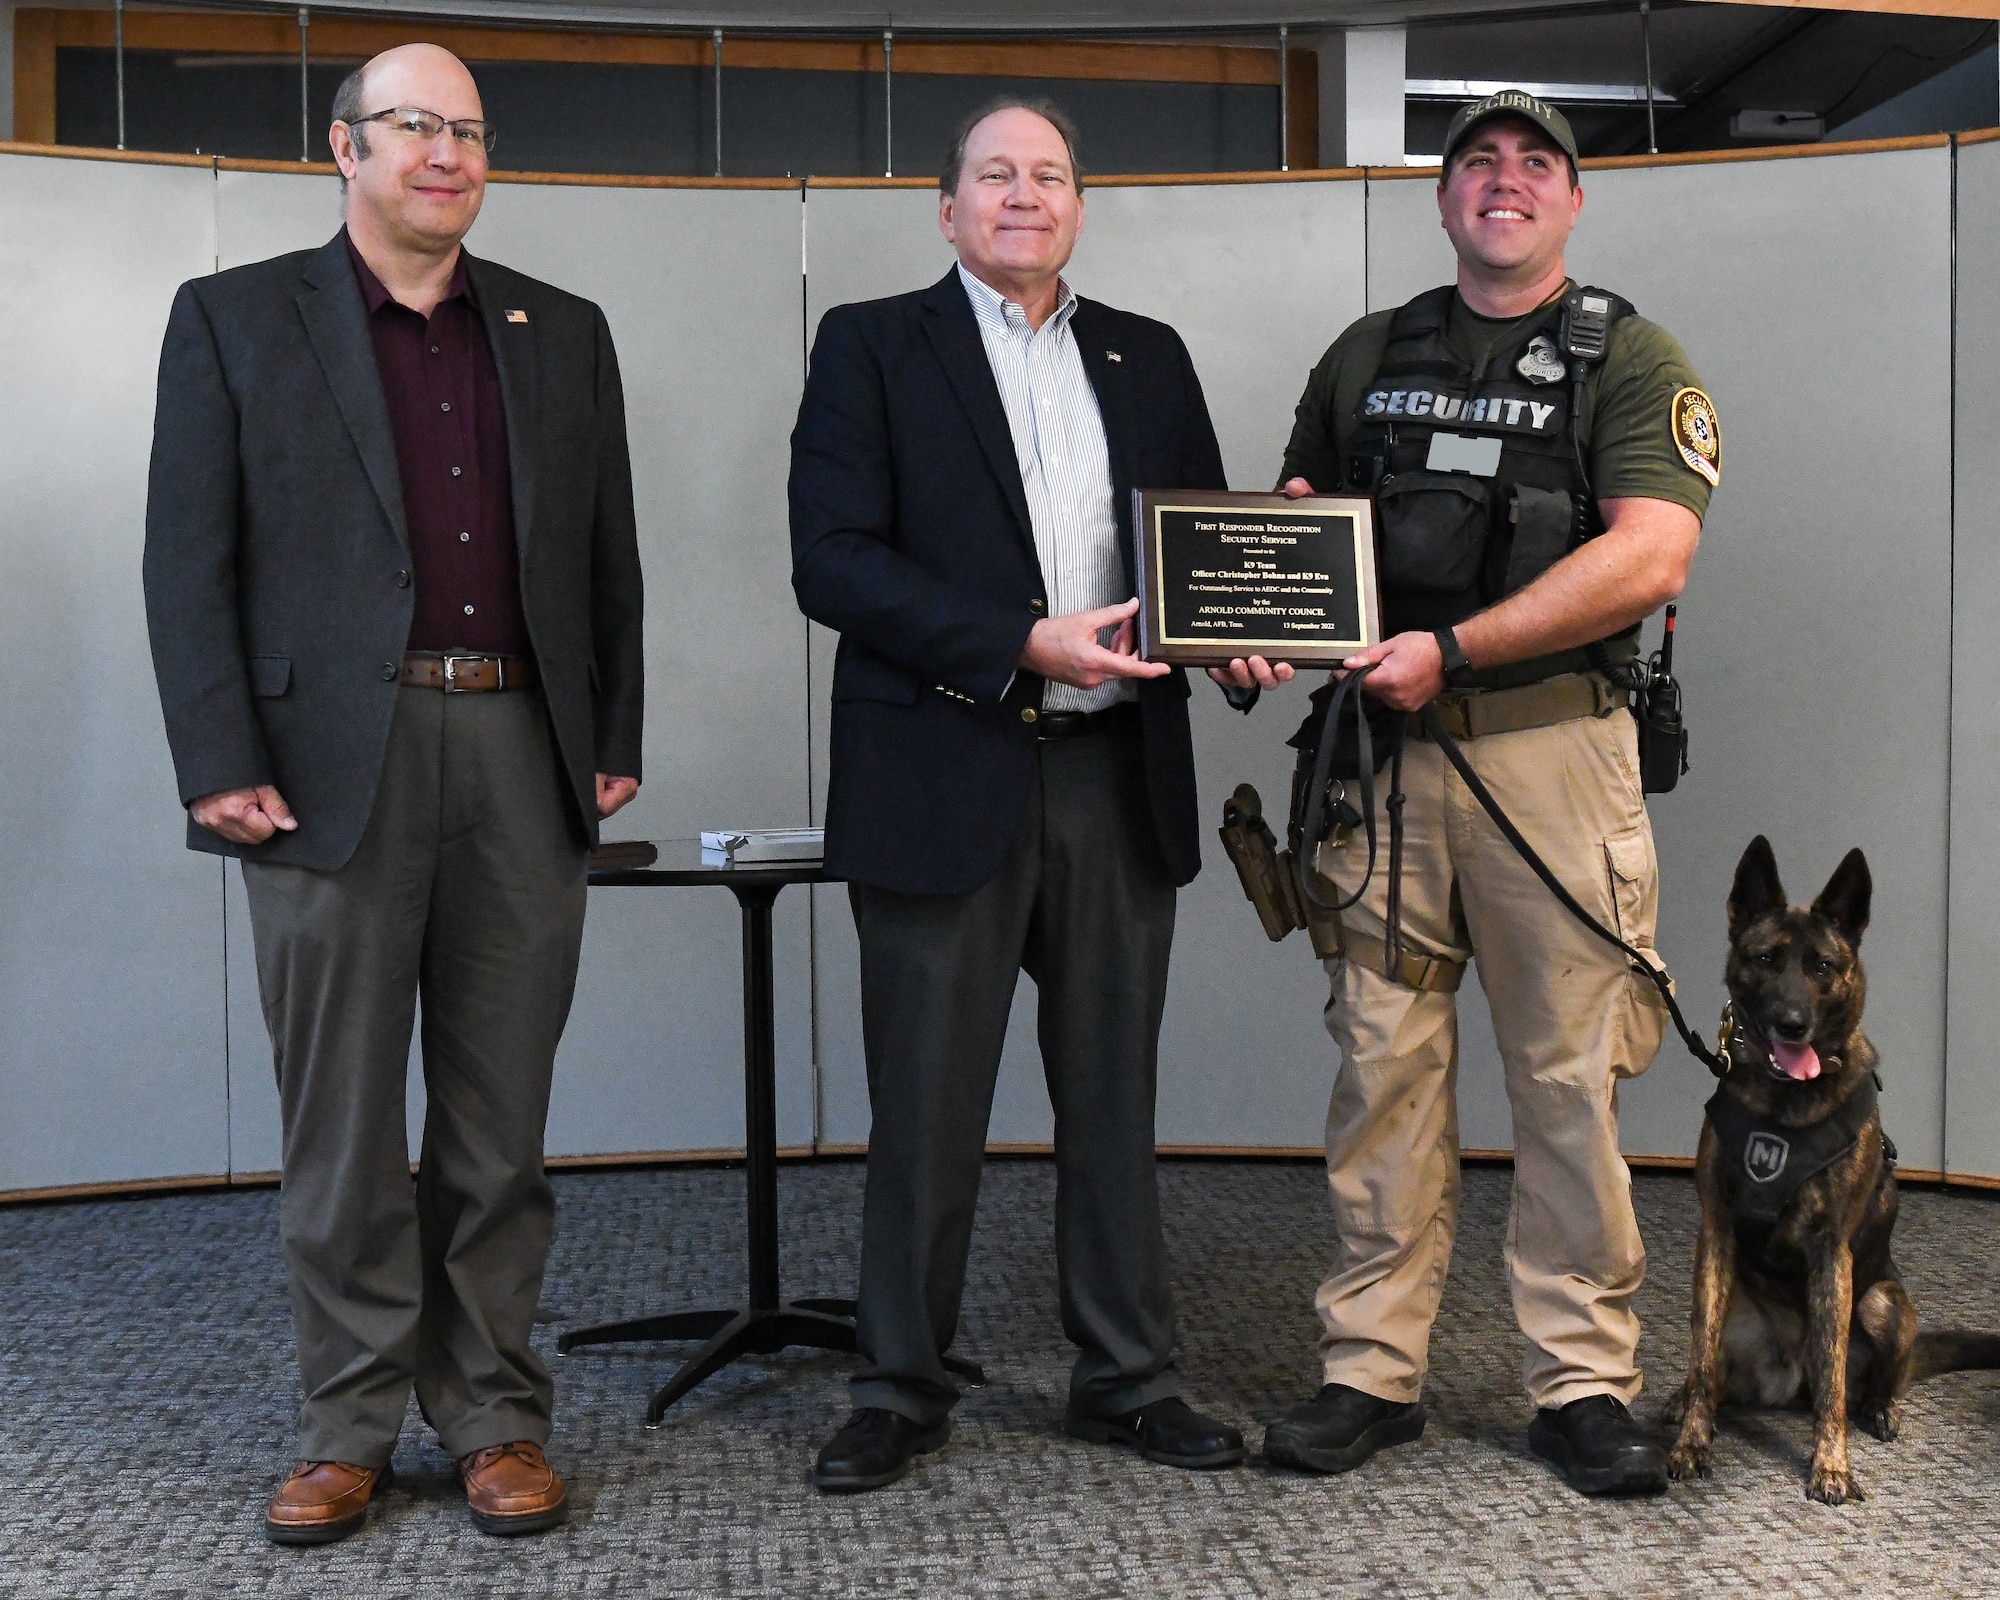 Man presents plaque to security guard and K-9, with another man pictured.